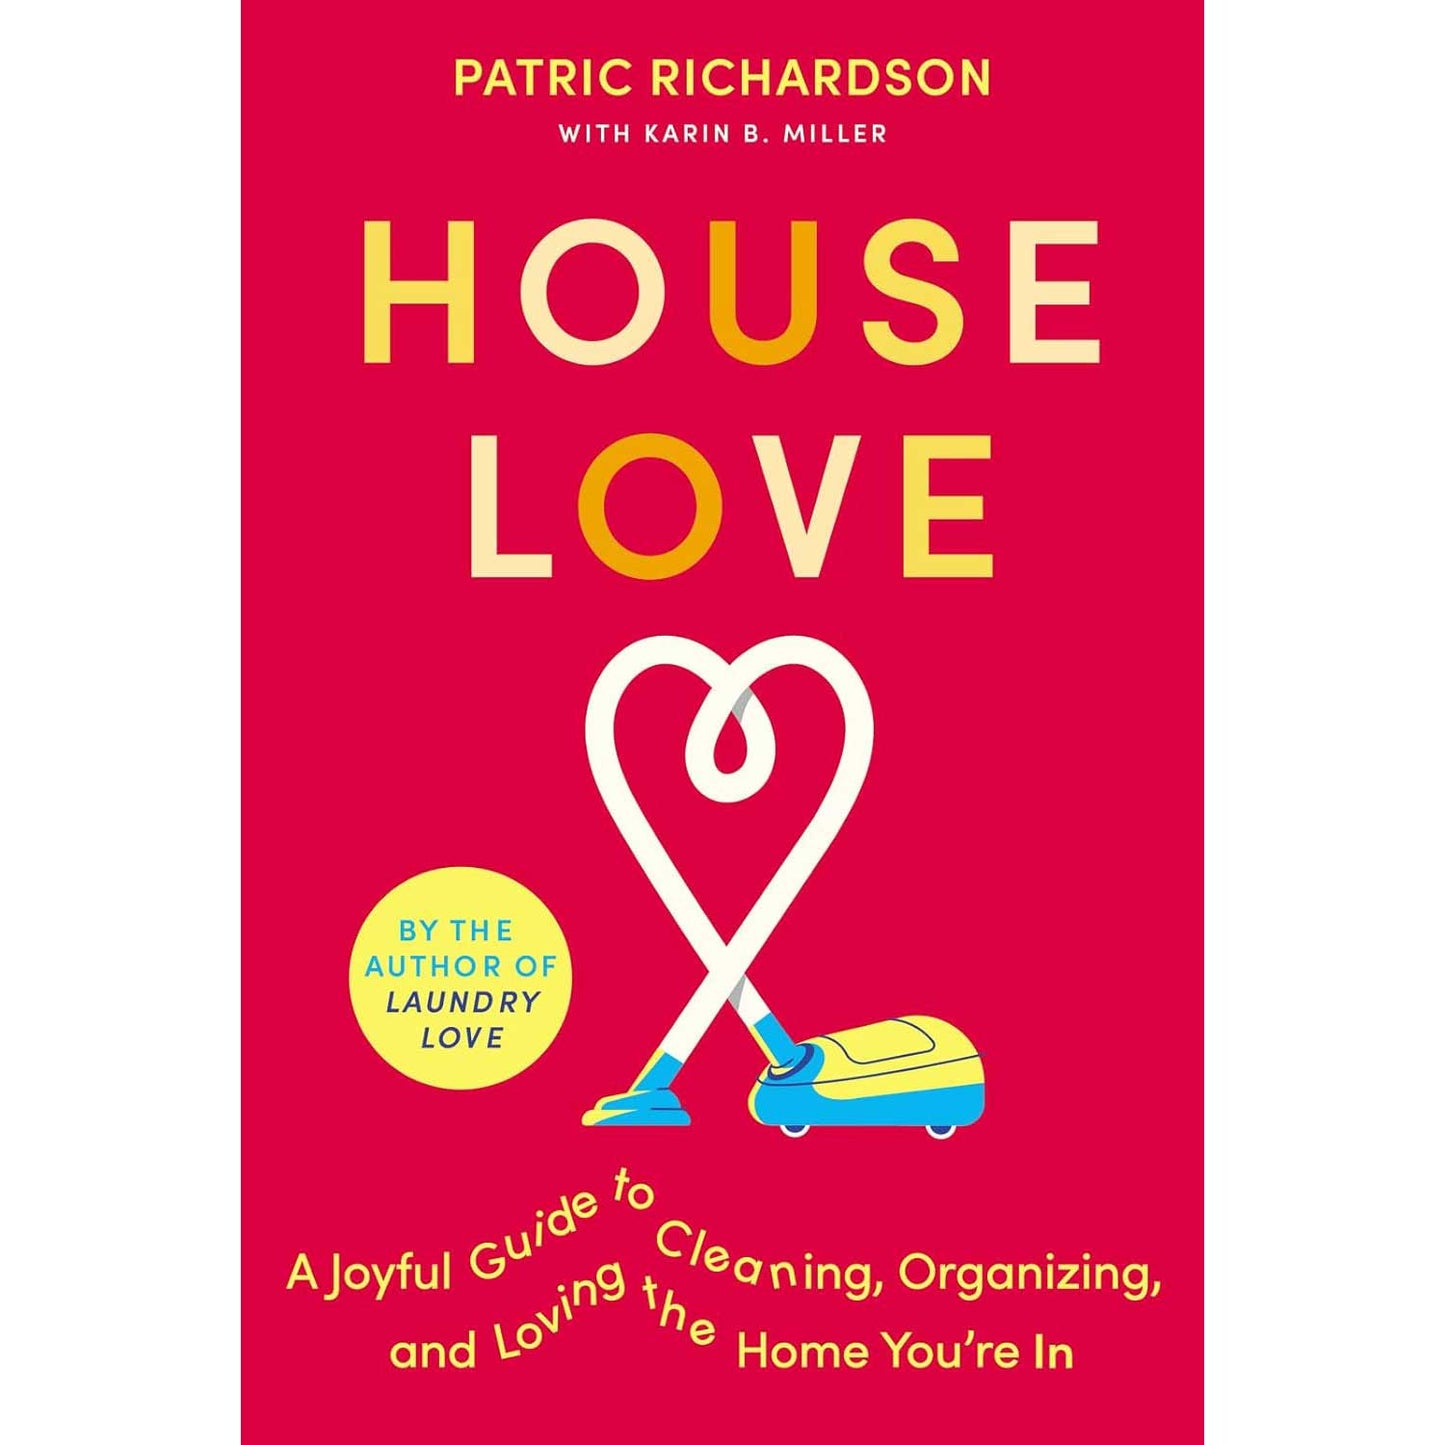 "House Love" Book Hardcover – Signed & Inscribed by Patric